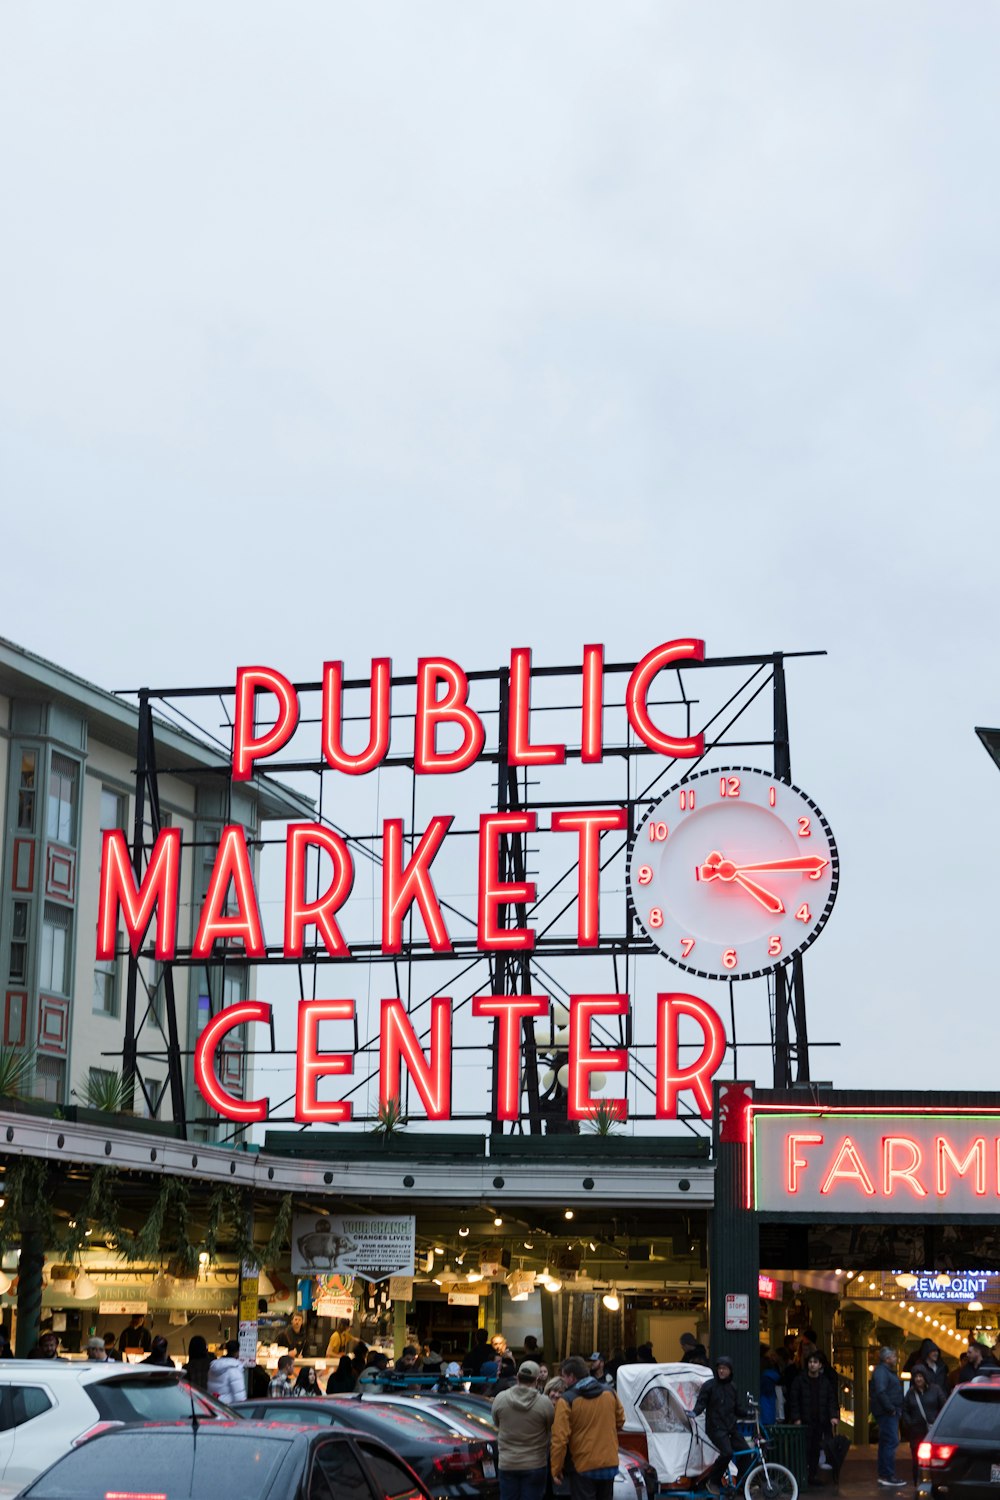 a public market center with a large neon sign